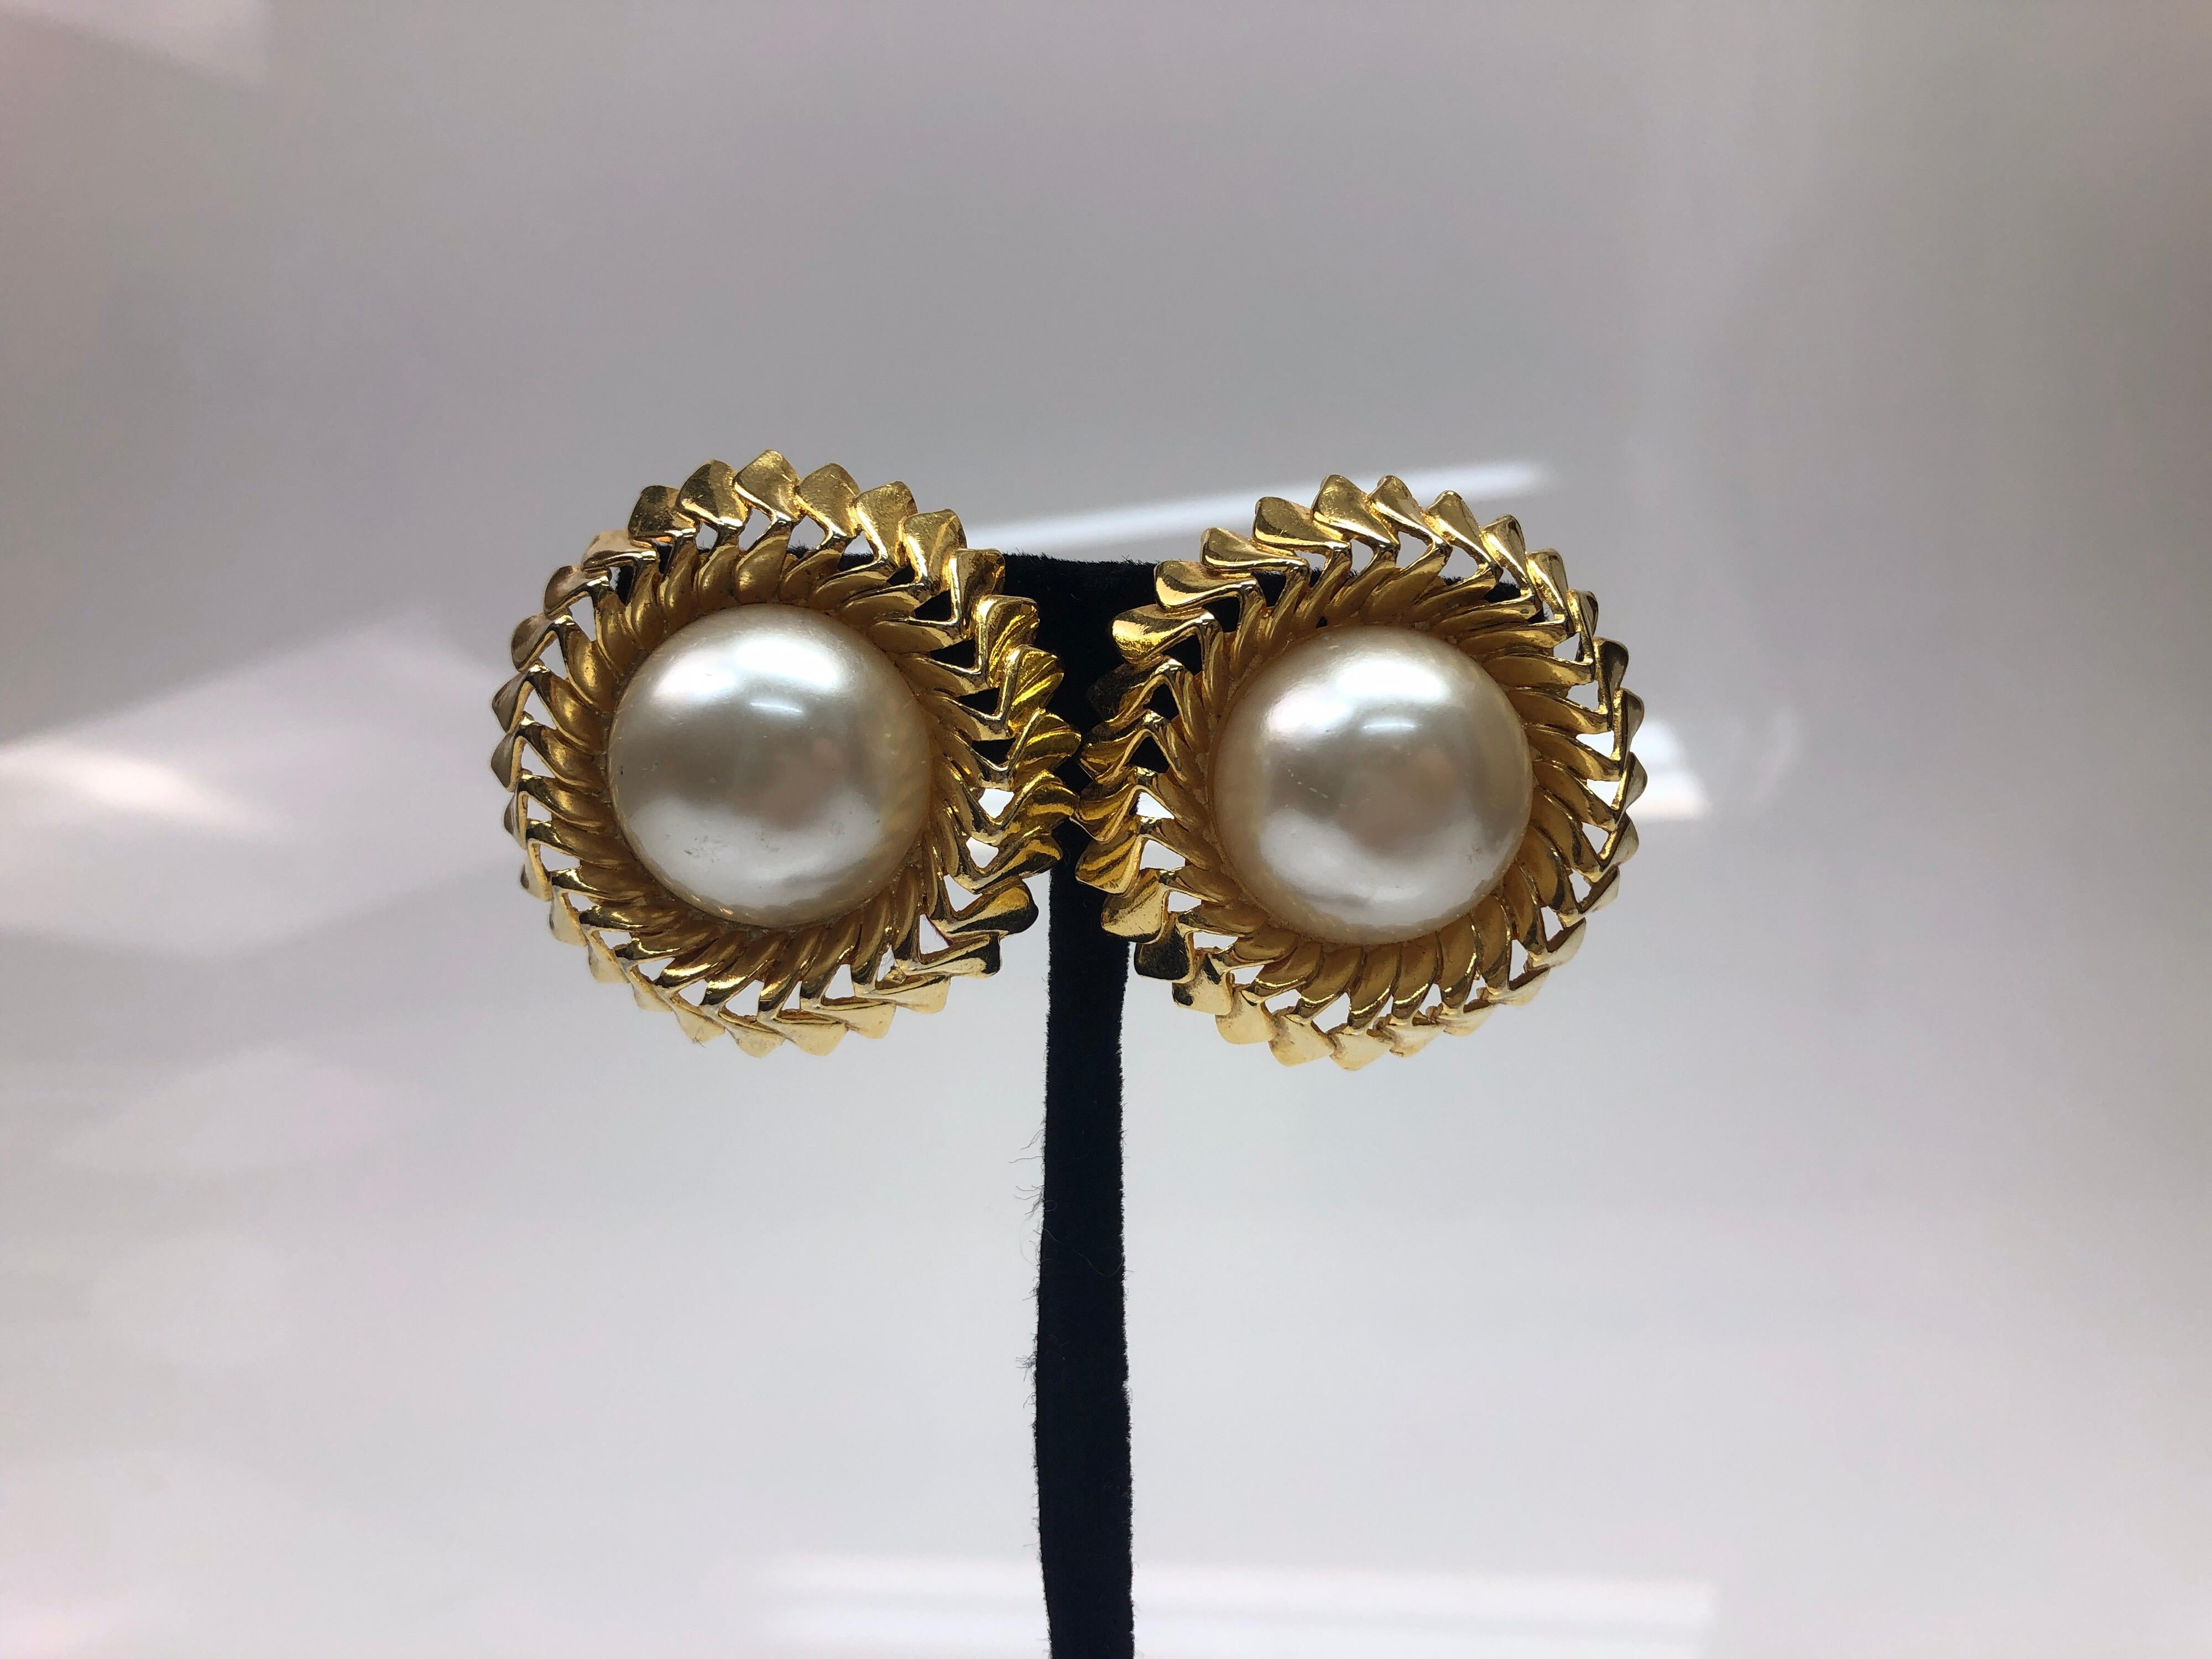 Chanel Rippled Gold Tone w/ Large Pearl Center Earrings. These beautiful Chanel earrings are in excellent condition. They show barely any sign of use. They are clip on earrings, with no back cushion or gel pad. They have a gold ripple design on the